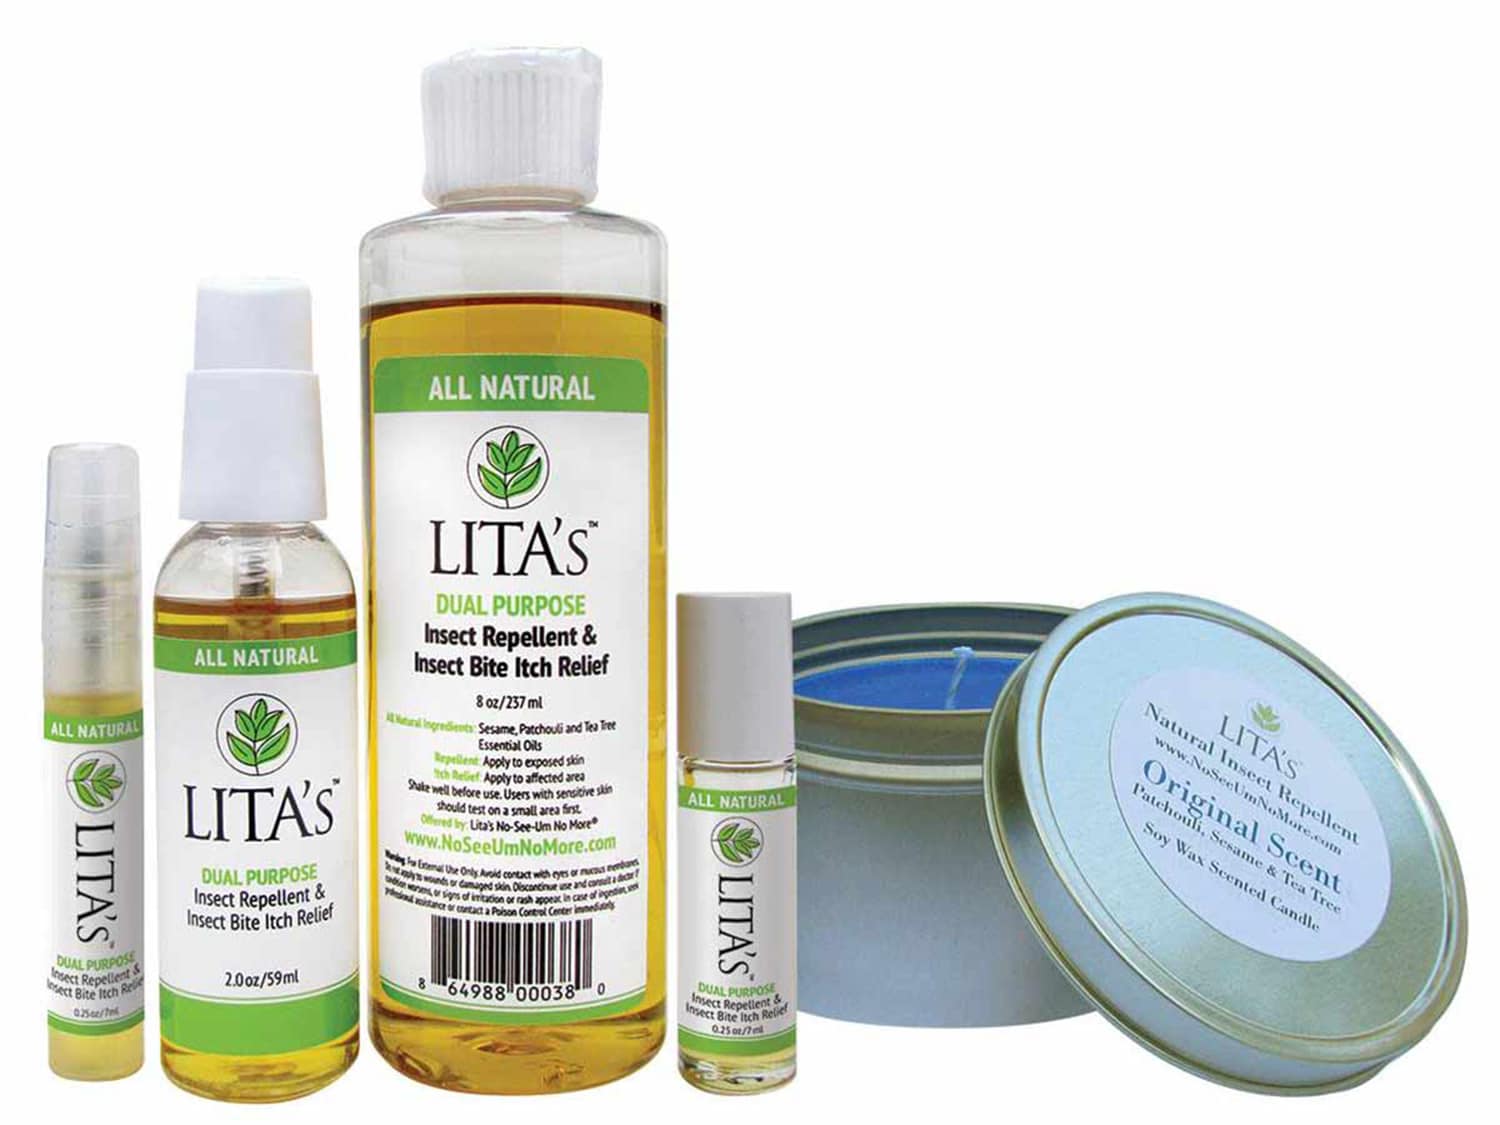 Litas insect repellent